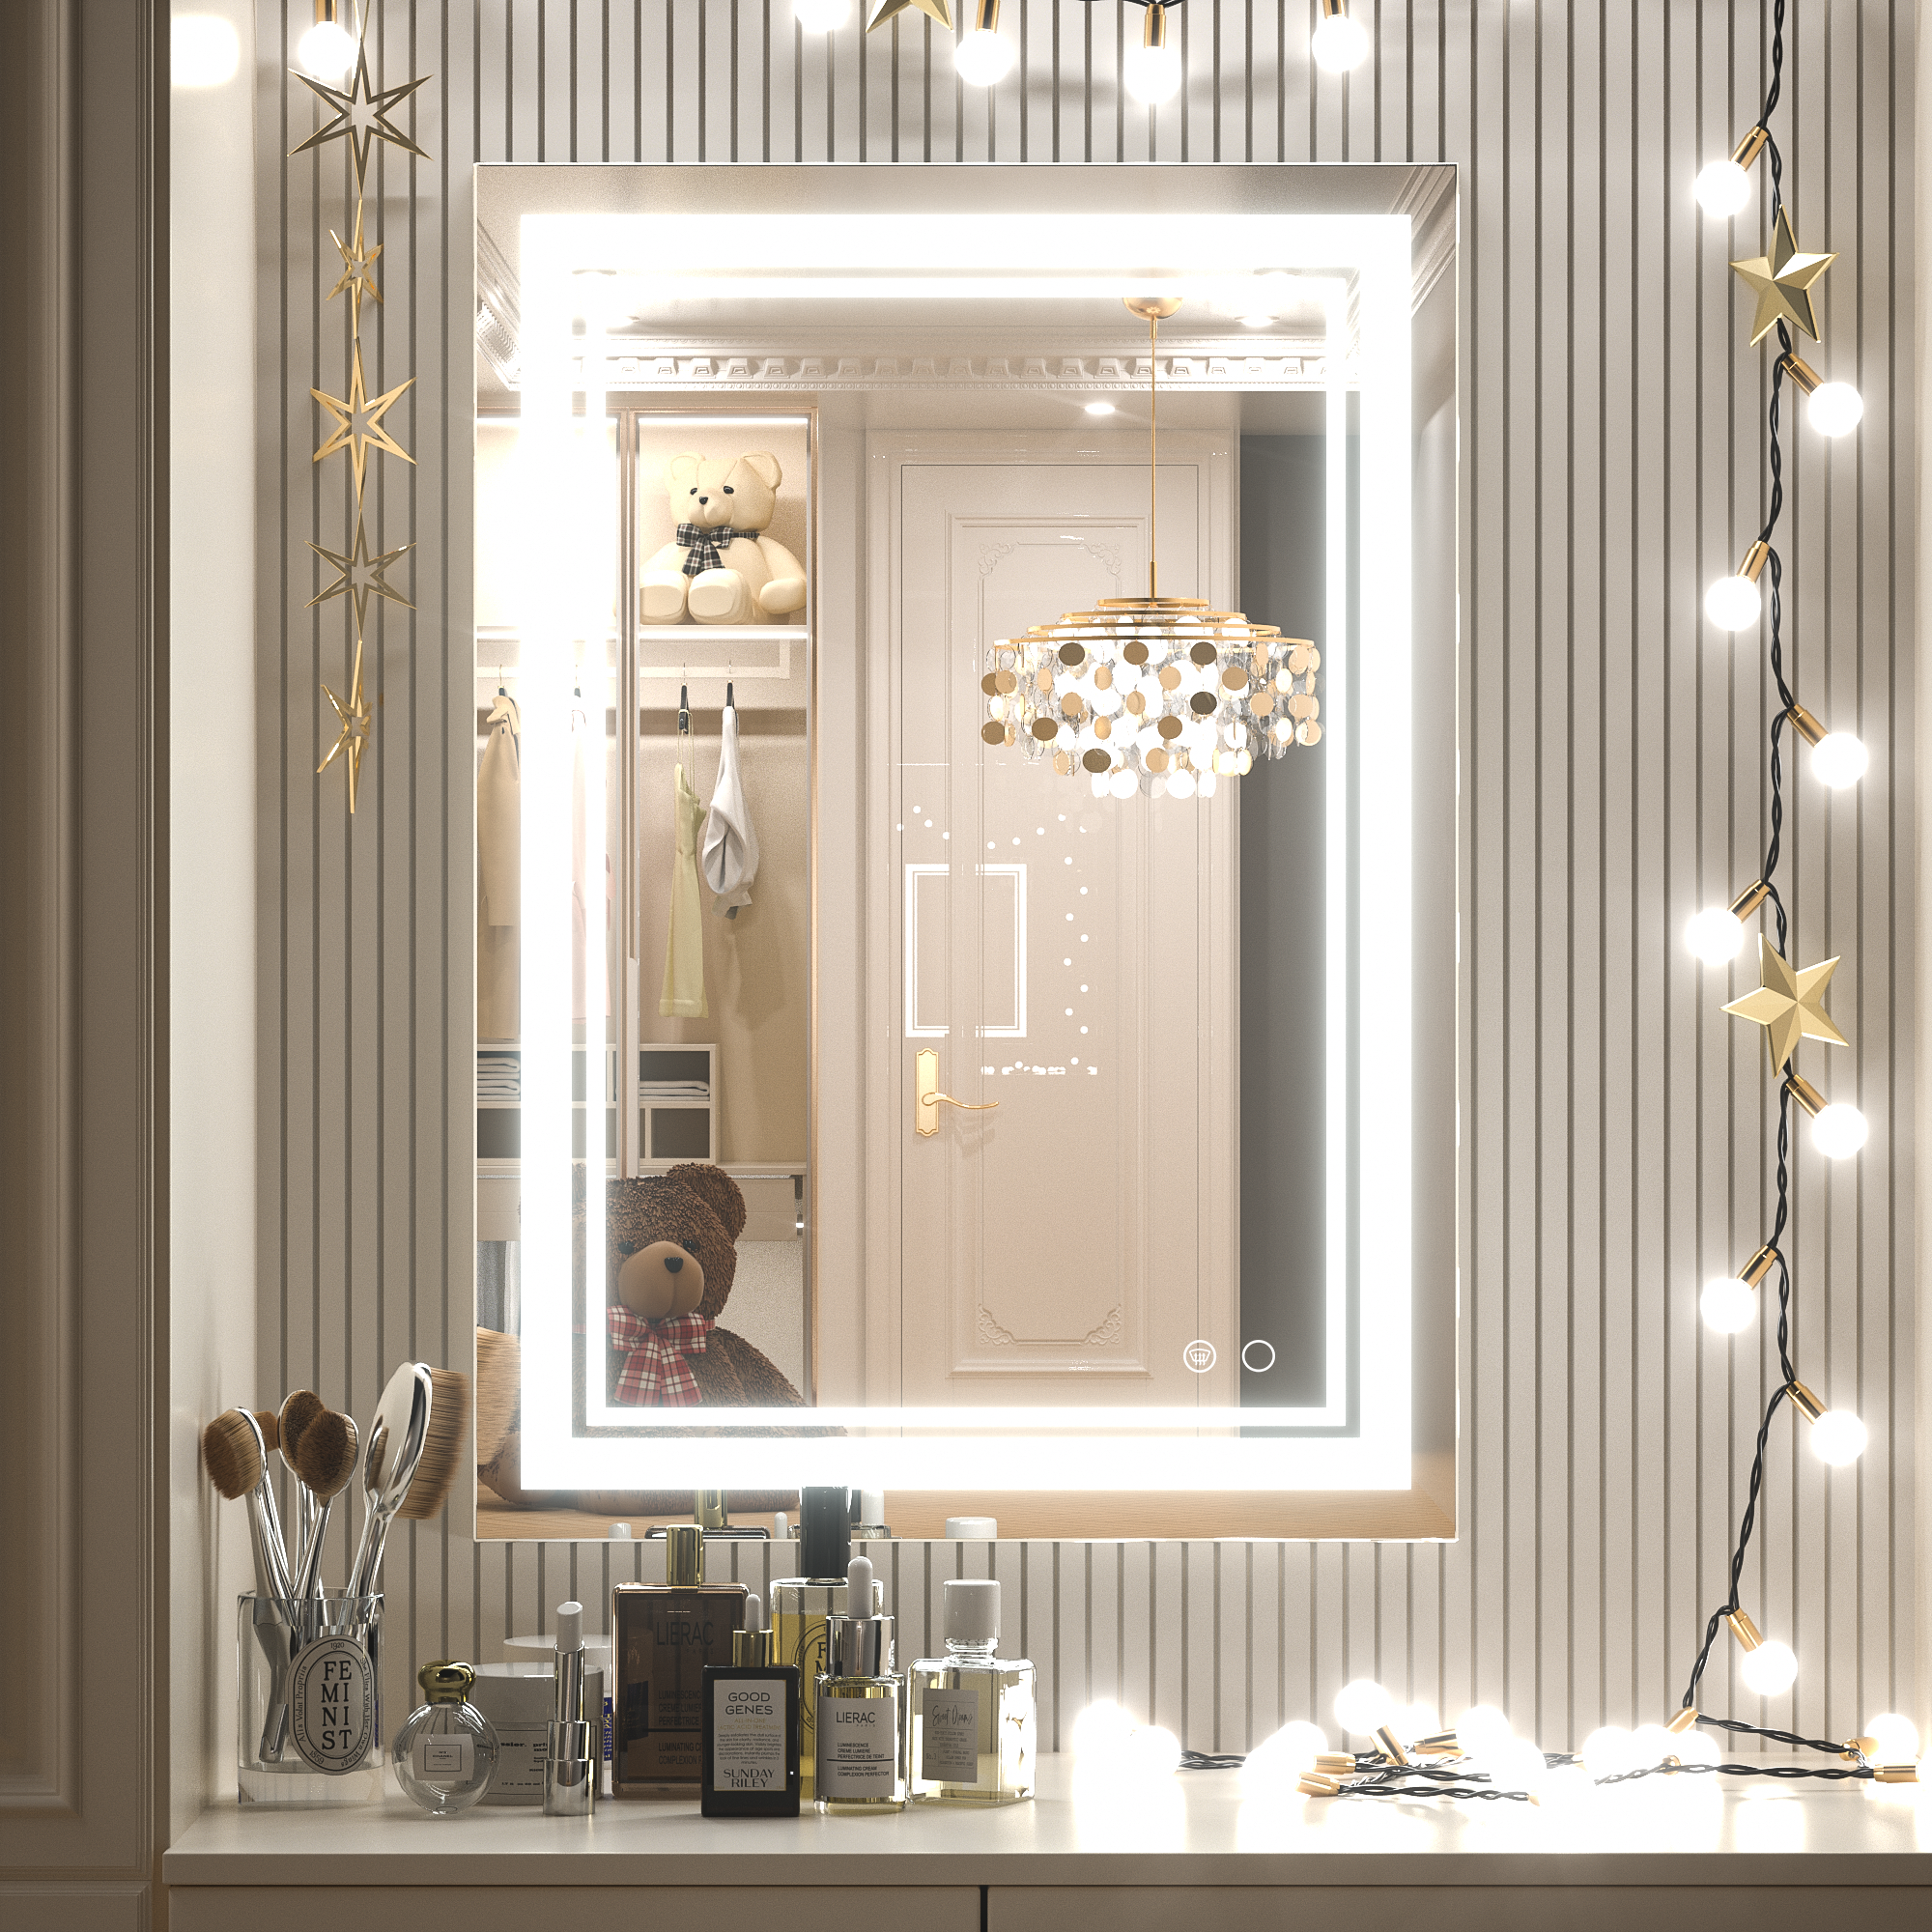 https://keonjinn.com/collections/3-color-led-bathroom-mirror/products/3-color-frontlit-led-bathroom-mirror